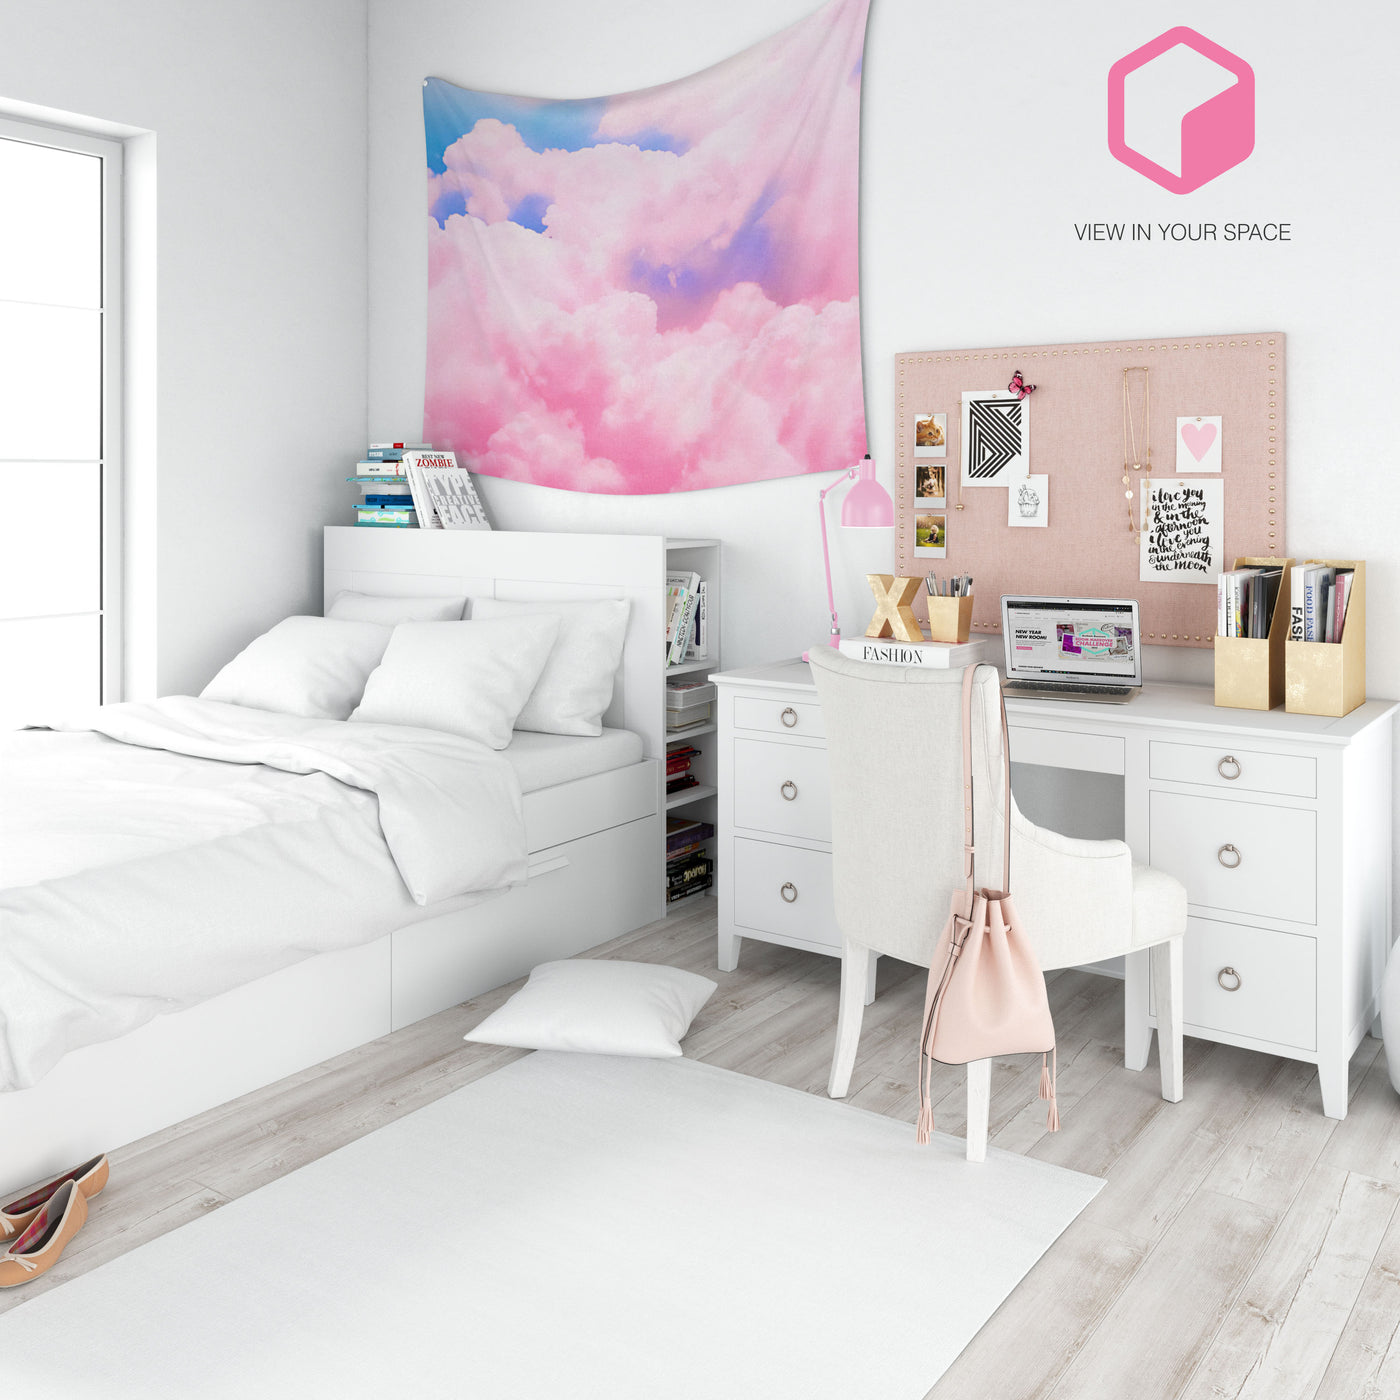 The Best Aesthetic Bedroom Decor & Accessories From